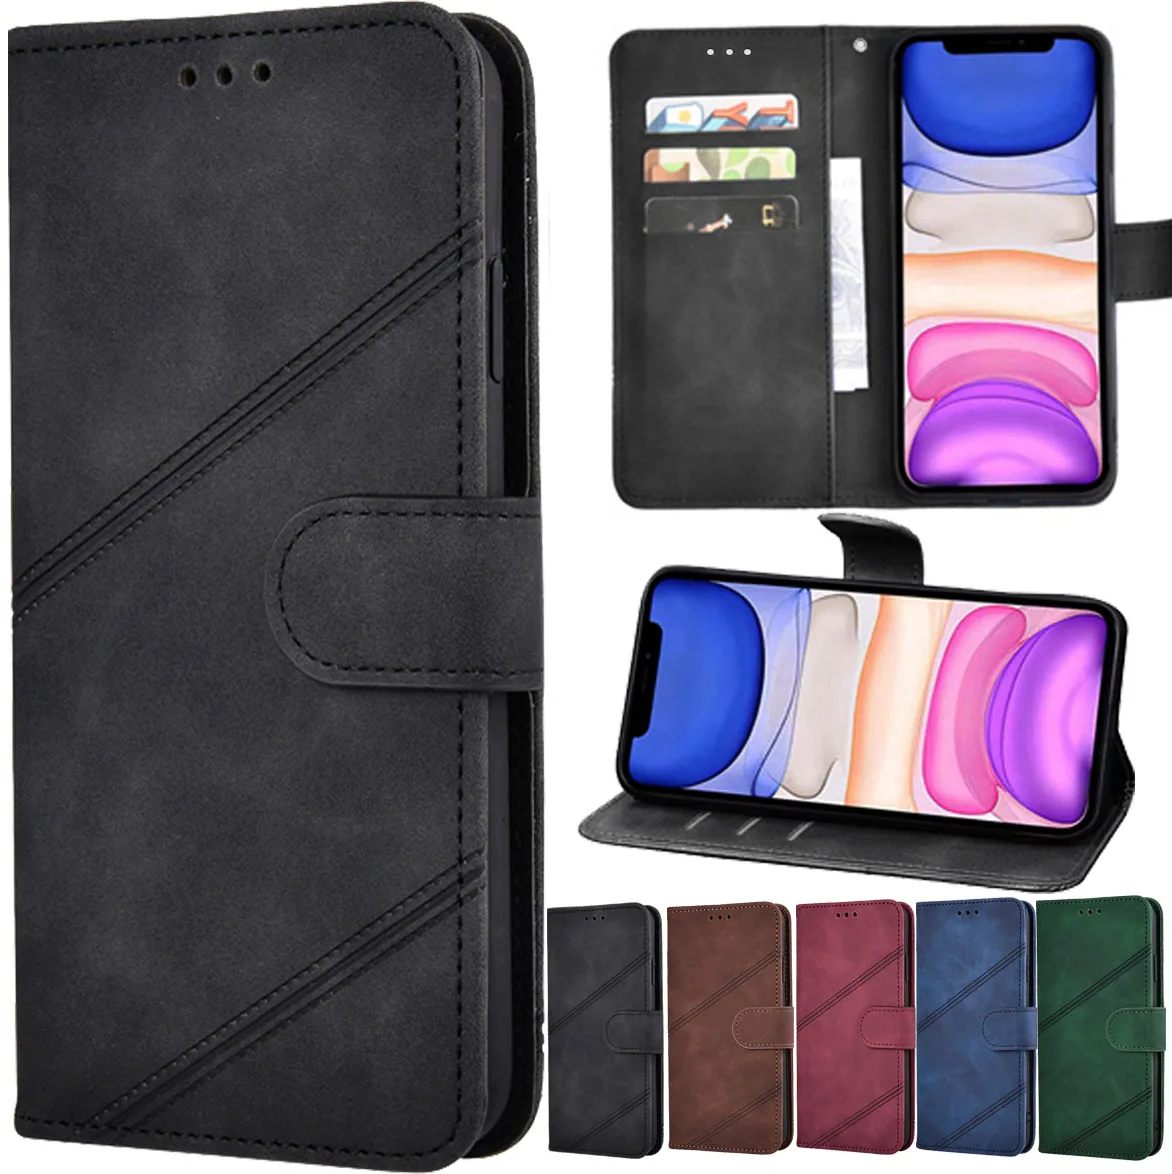 

Flip Leather Wallet Case For Honor 8 8A 8C 8X 8S 9 9A 9C 9i 9N 9S 9X 50 Lite Premium Prime Pro Play Back Coque Phone Cover